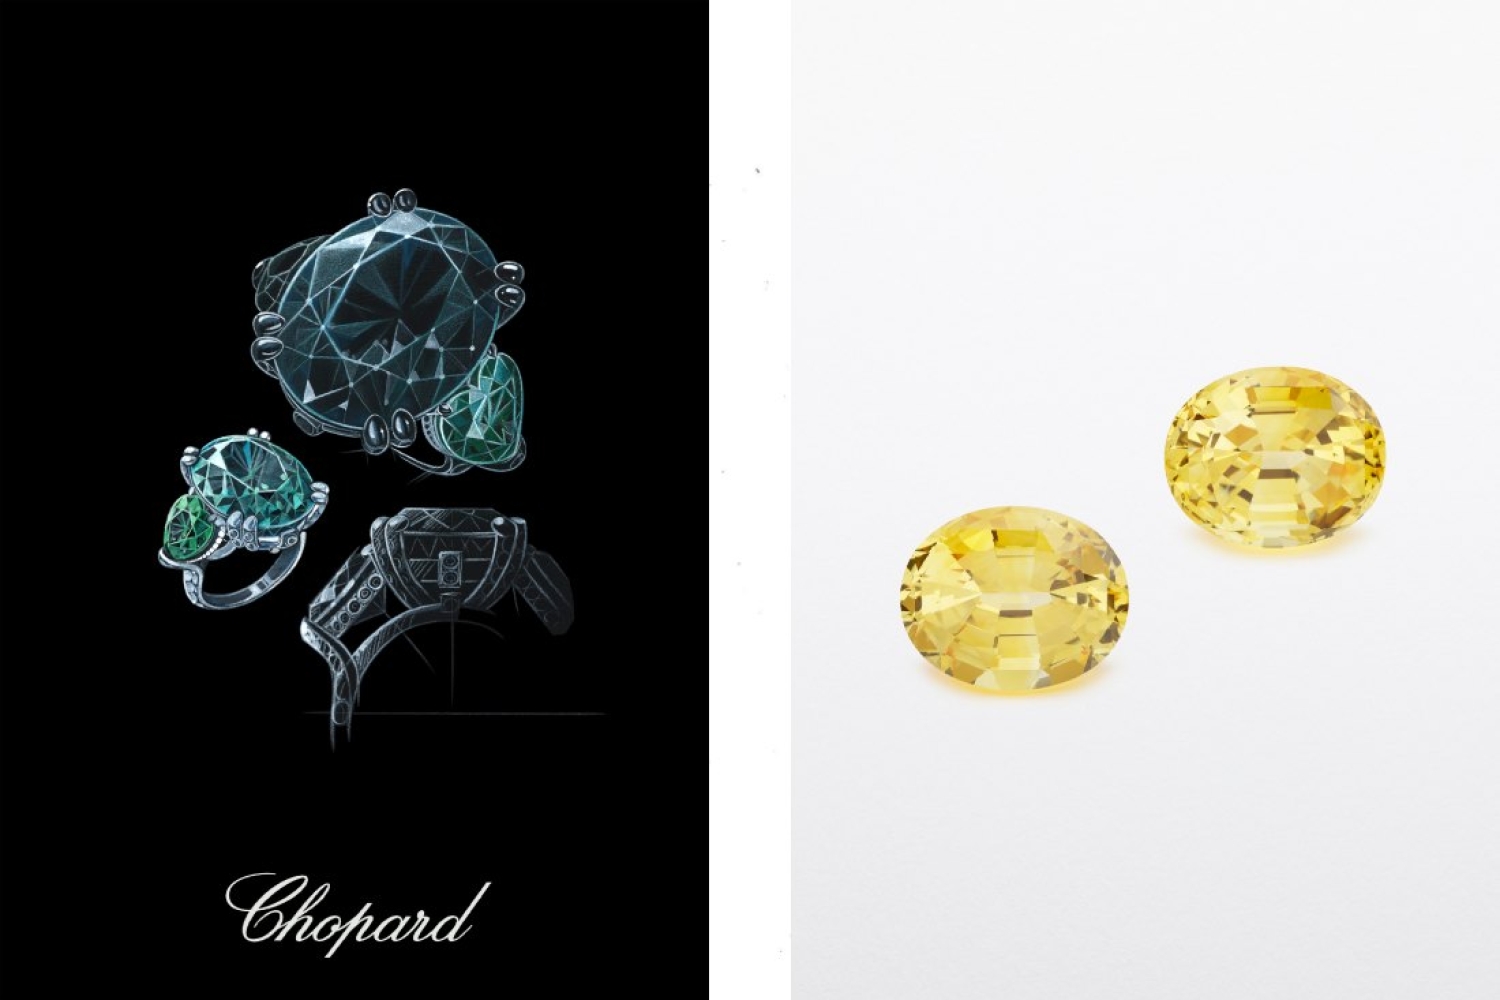 Chopard: Exceptional Stones